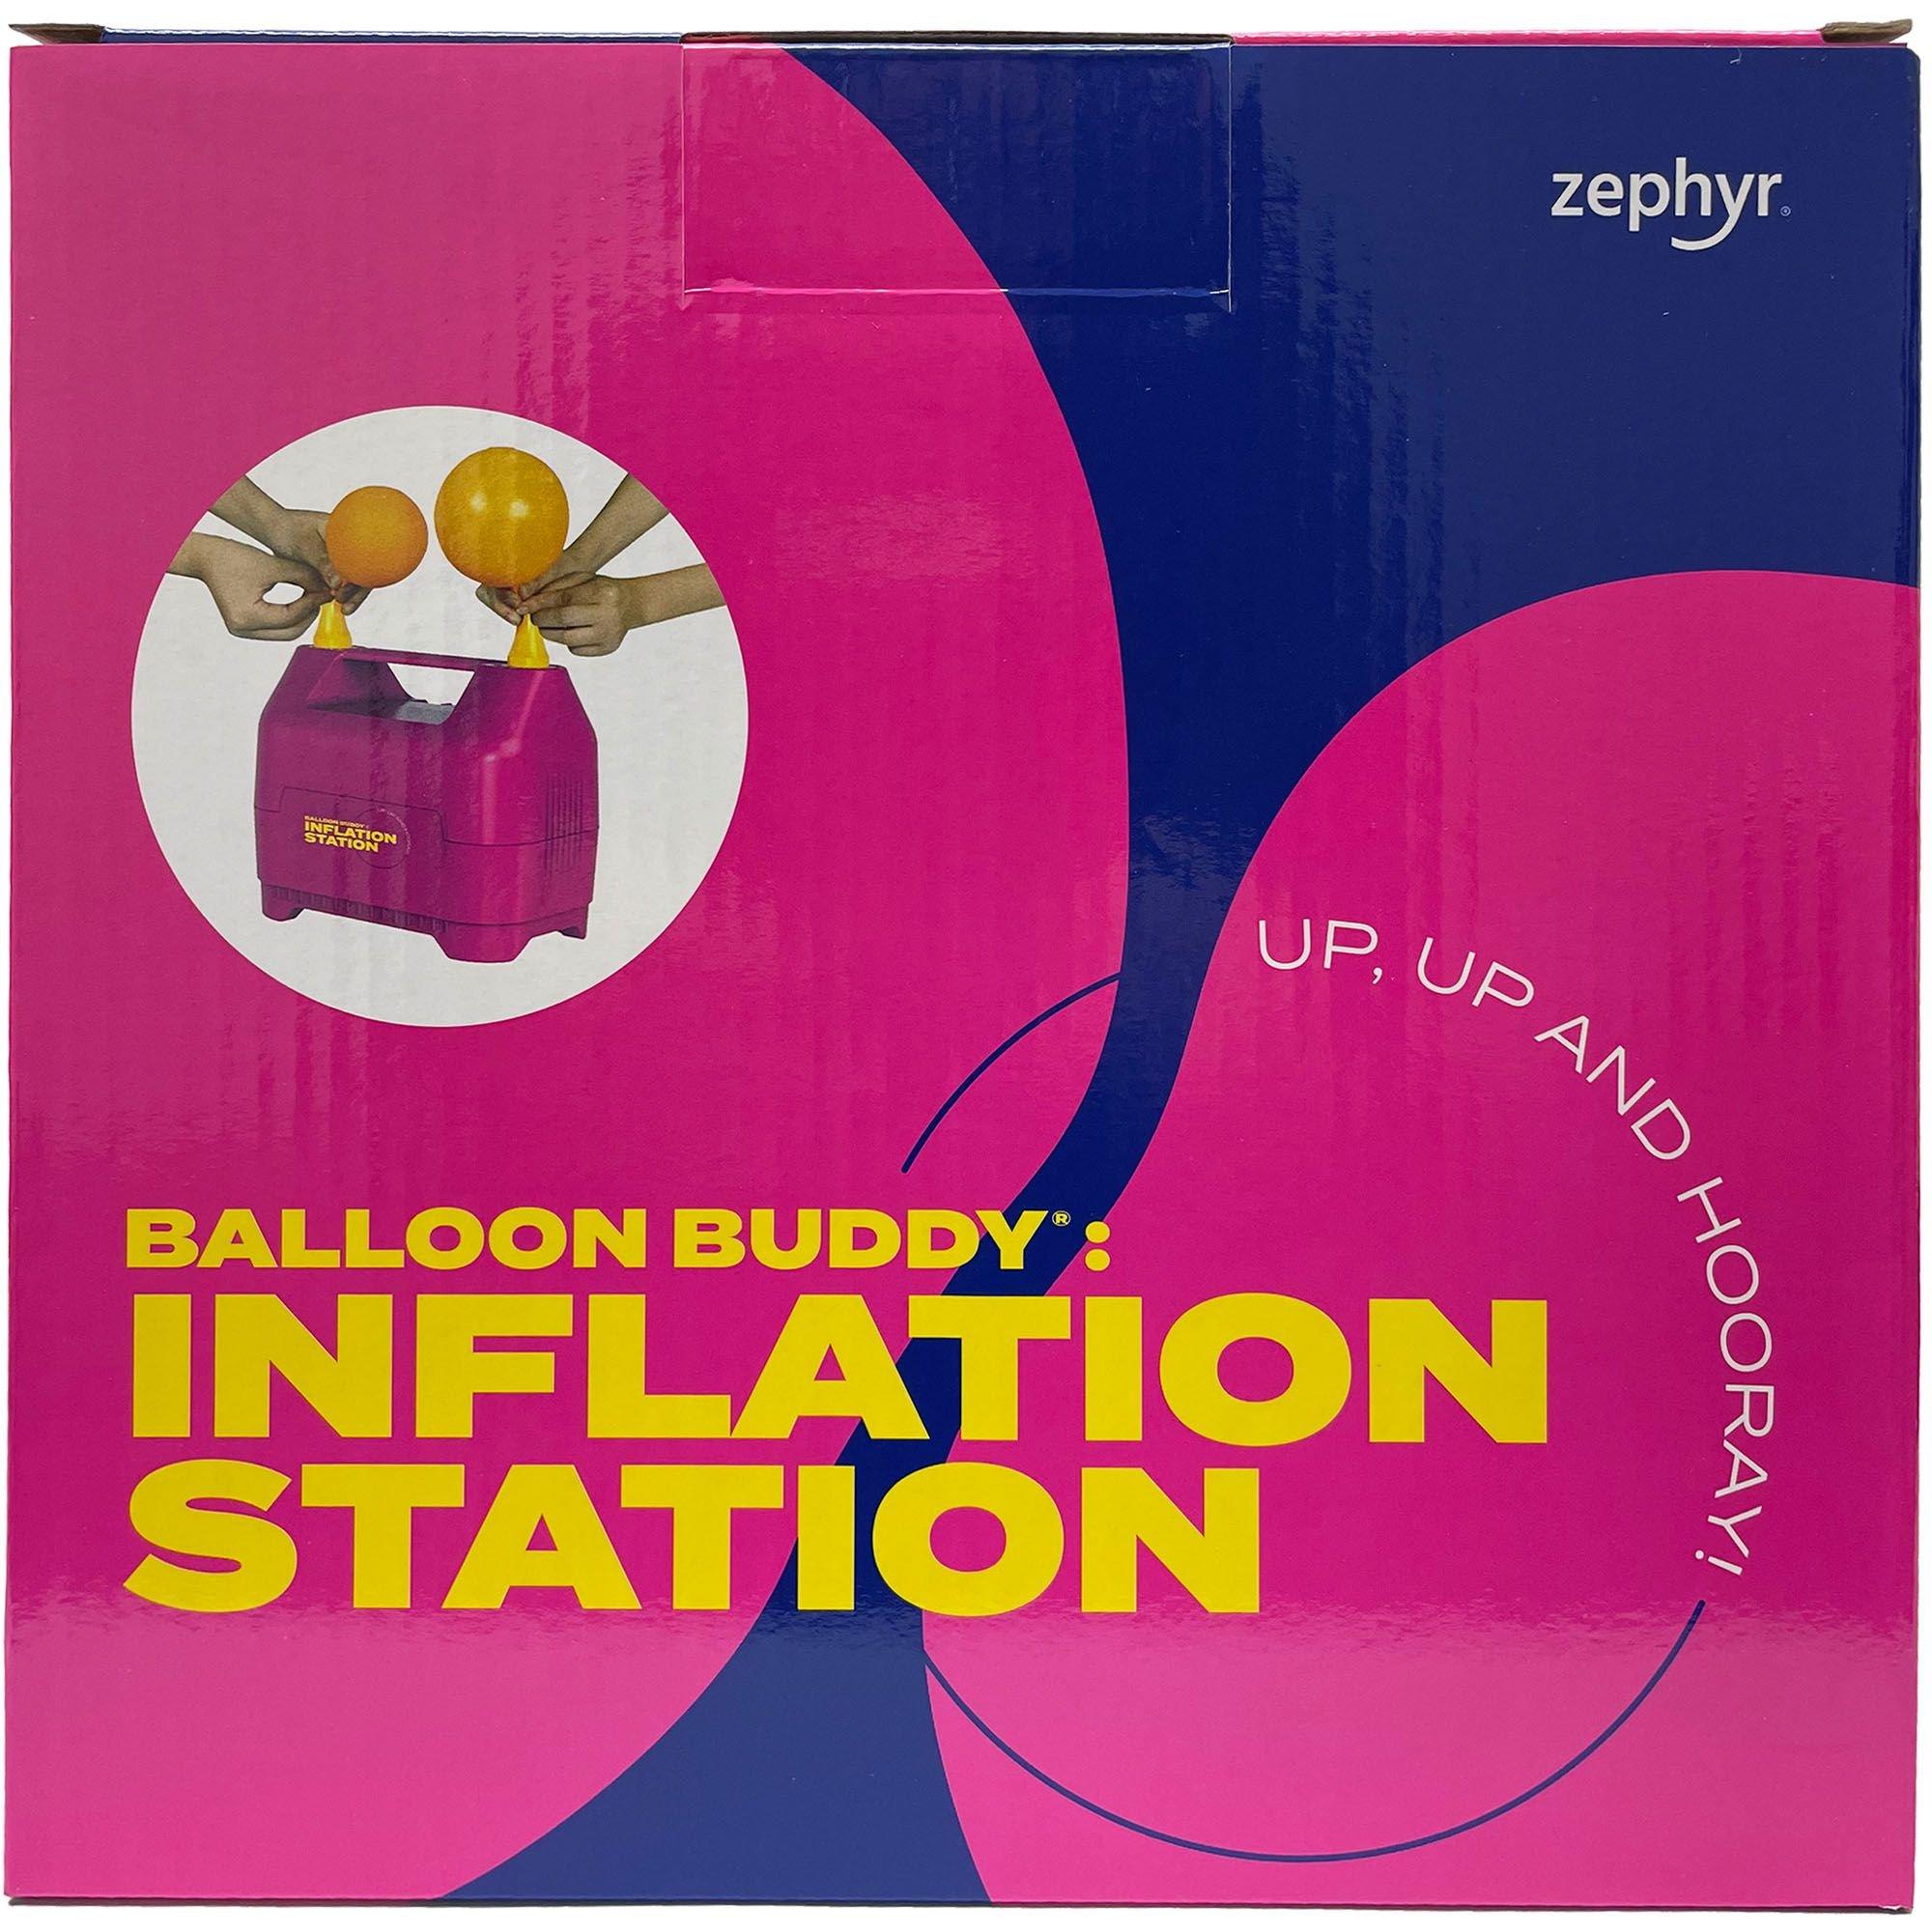 Dual Electric Balloon Pump, 7in x 8in - Buddy: Inflation Station